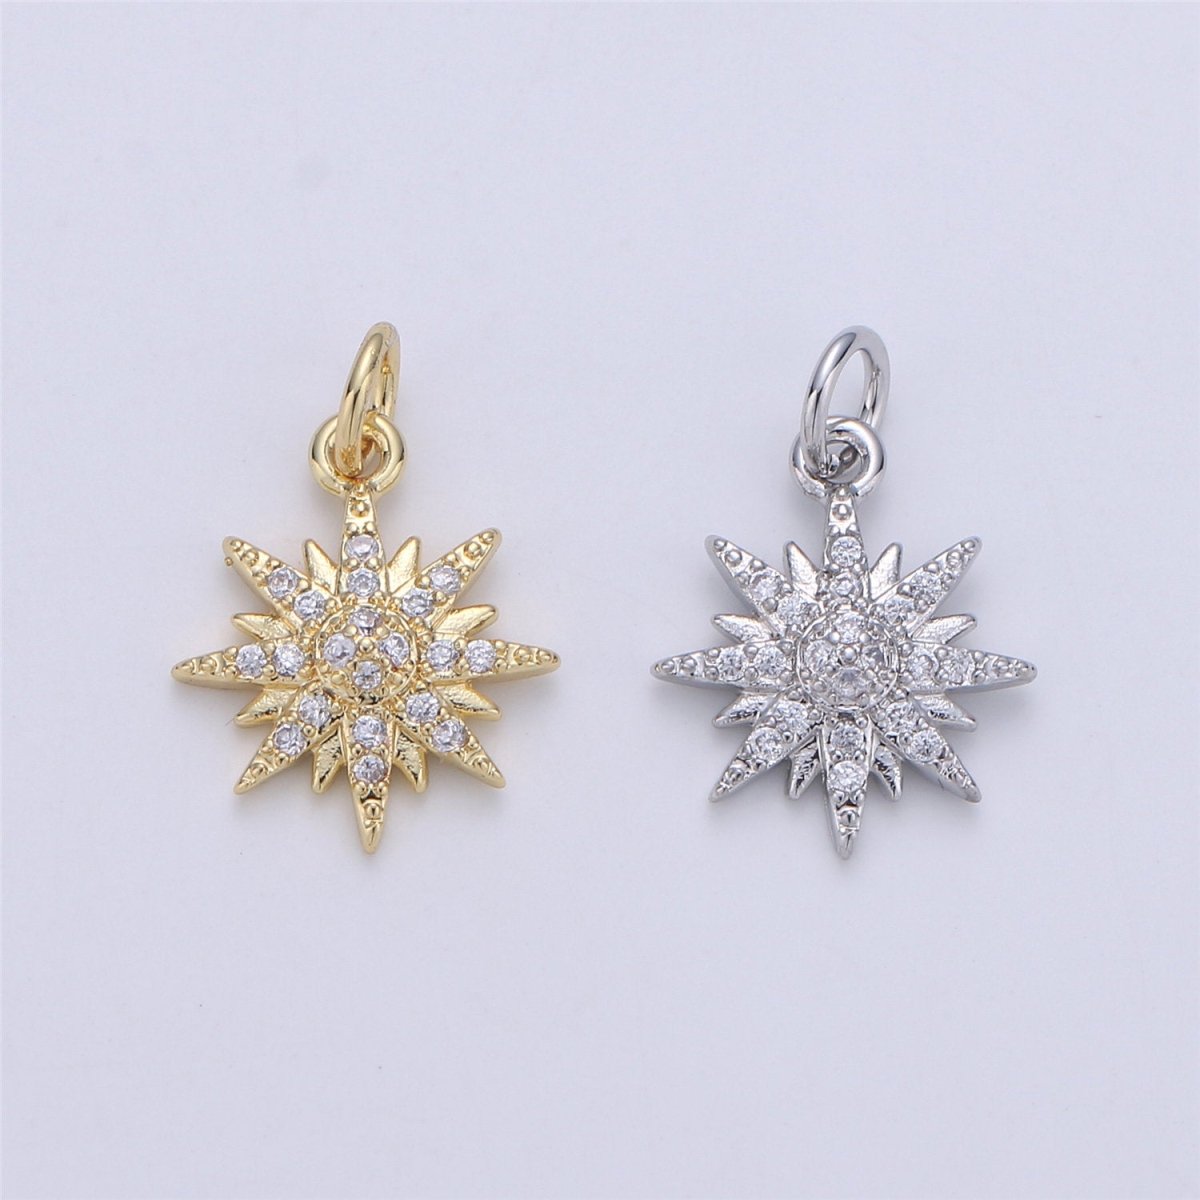 24K Gold filled Snowflake Snow Crystal Dainty Charm with Micro Pave Cubic Zirconia CZ Stone for Necklace or Bracelet,C-901 - DLUXCA